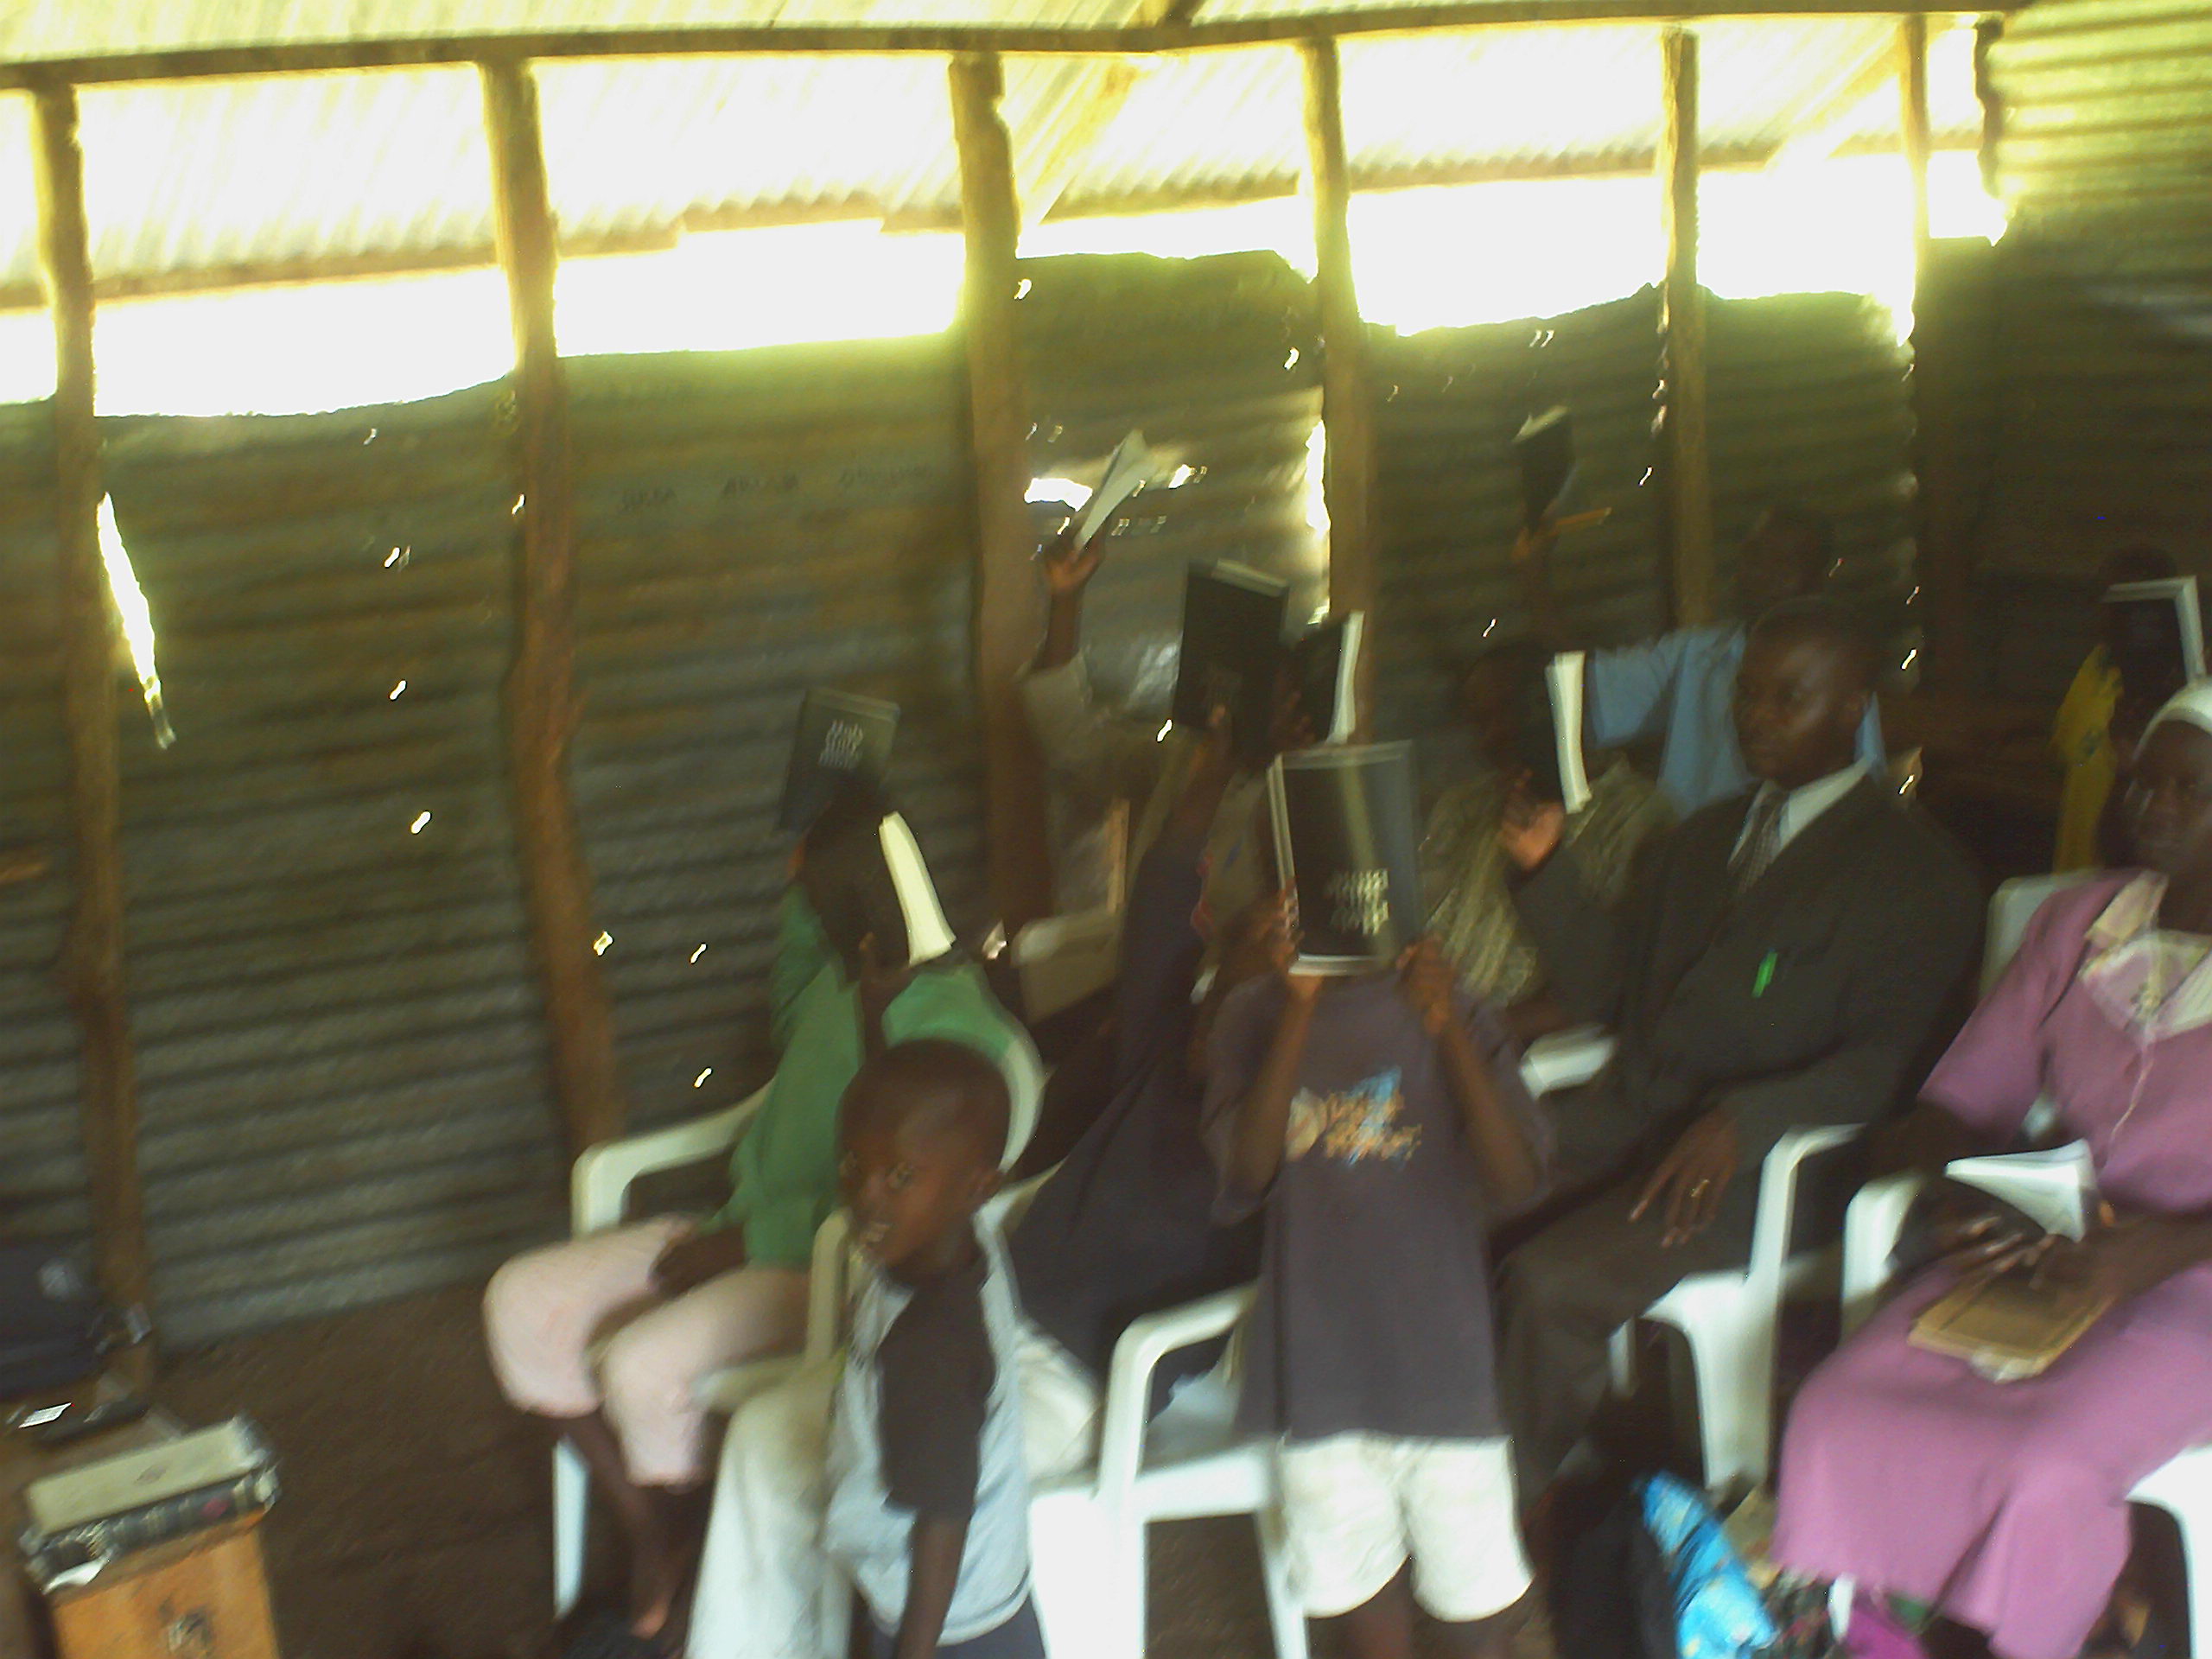 Church members with new Bibles